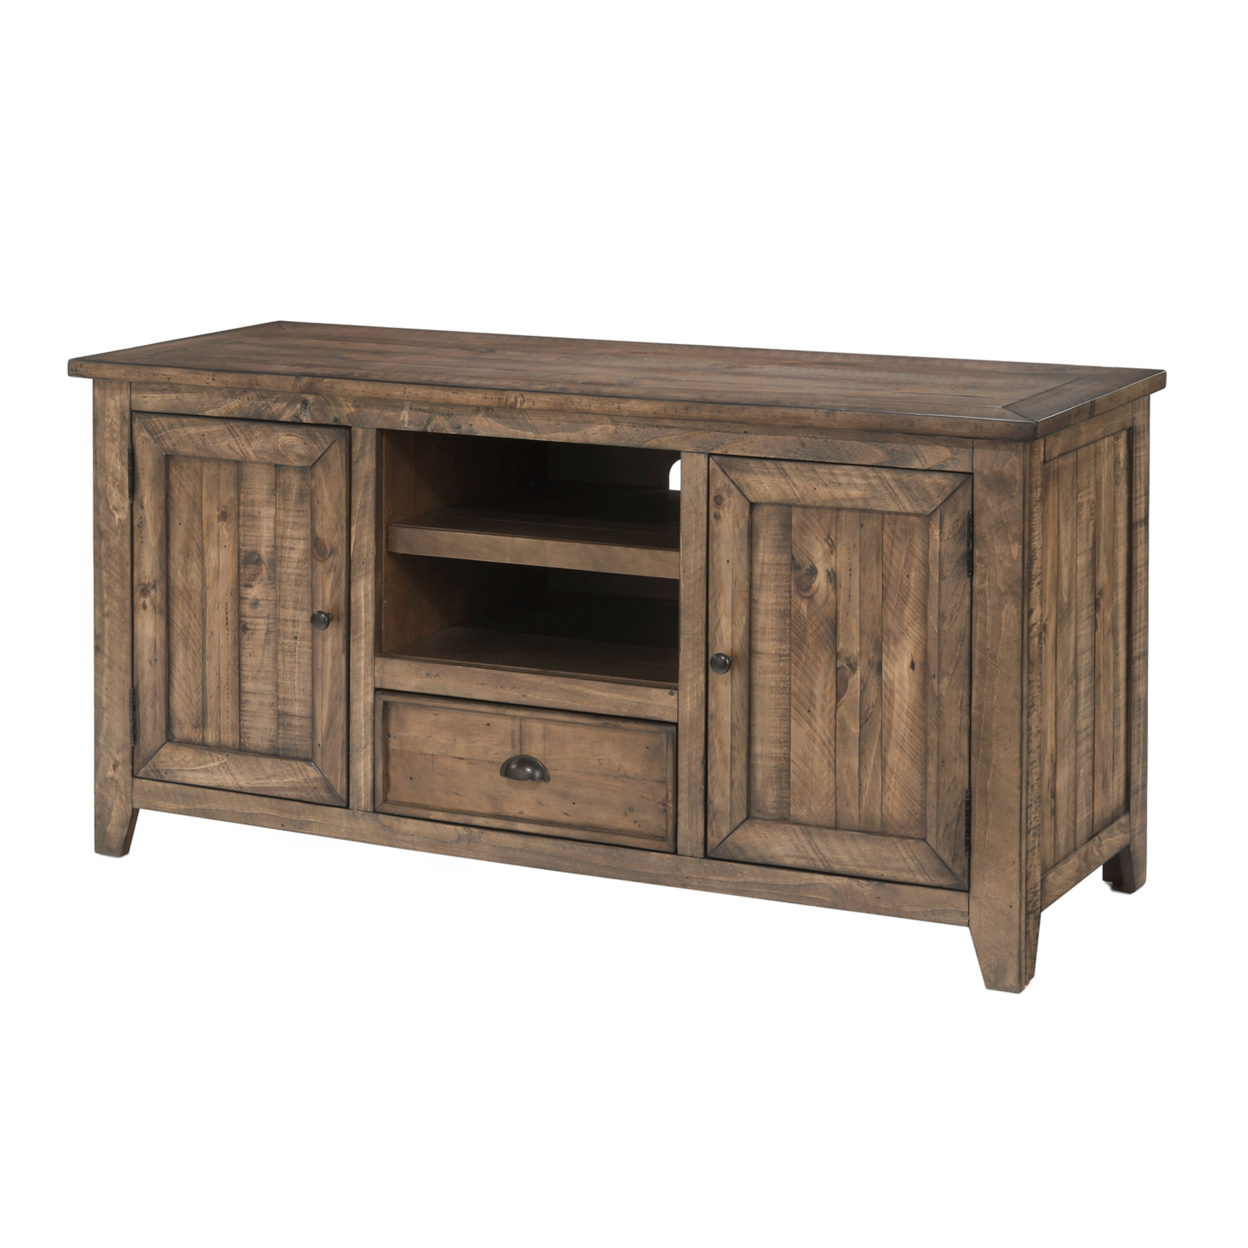 Coastal Style Wooden TV Stand With 2 Cabinets And 1 Drawer, Brown- Saltoro Sherpi